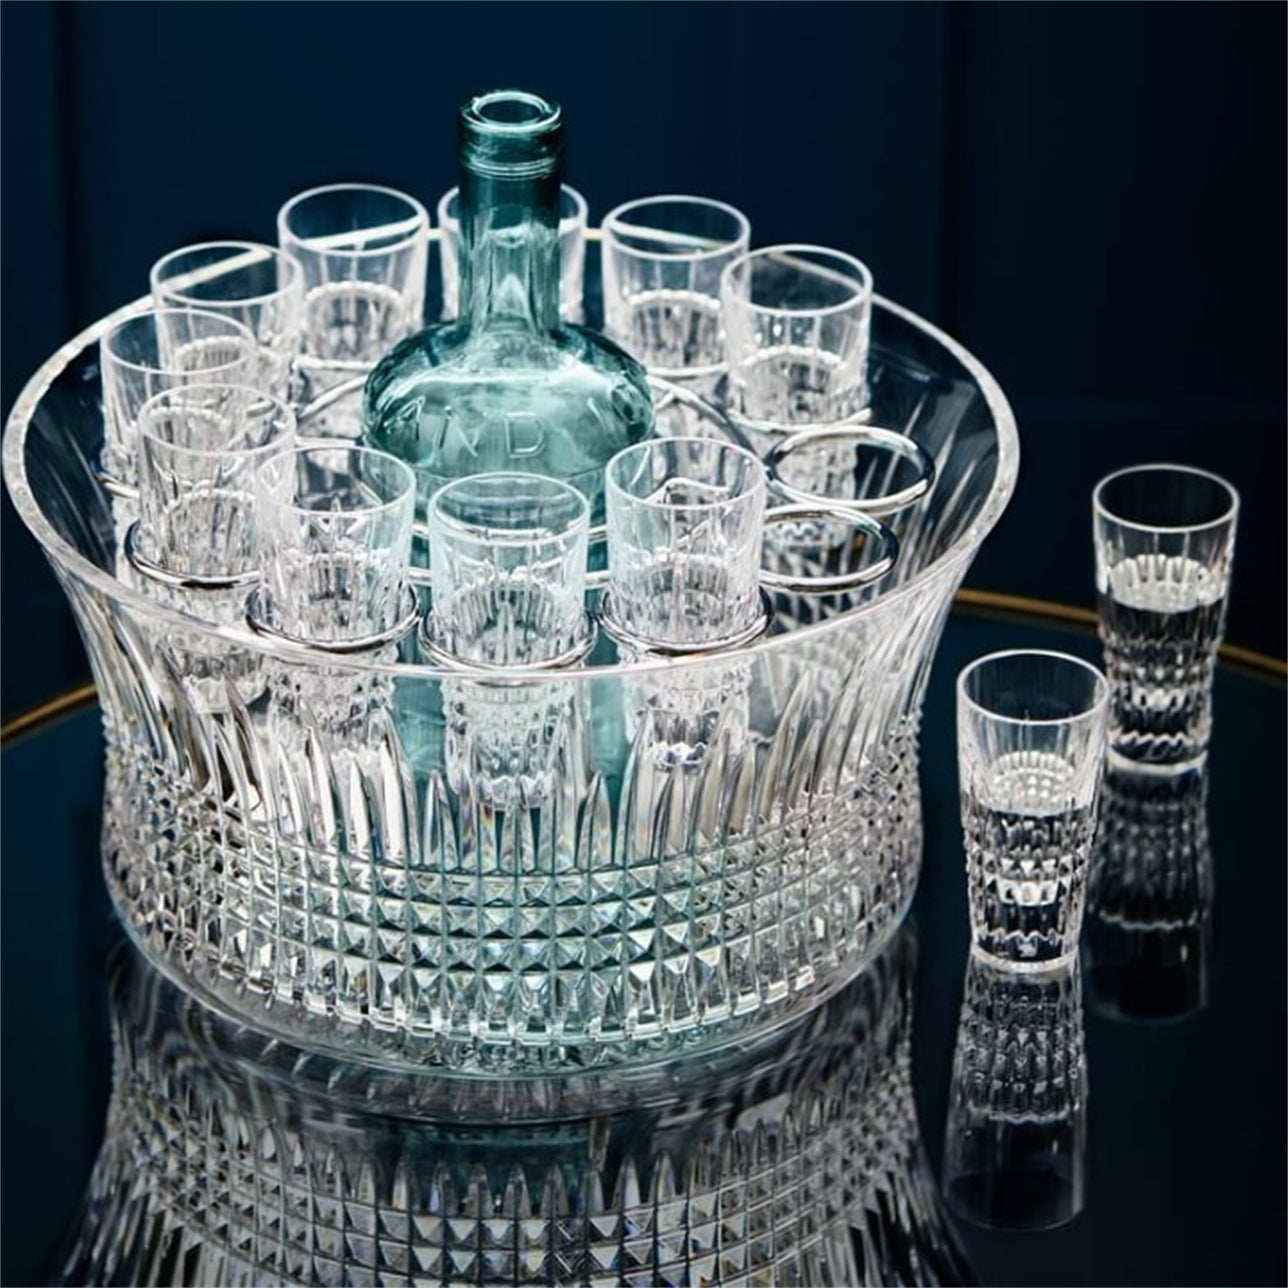 Waterford Crystal Lismore Diamond Bowl Vodka Chill Set 30cm  The Lismore Diamond pattern is a strikingly modern reinvention of the Waterford classic : characterized by intricate diamond cuts rendered in radiant fine crystal.